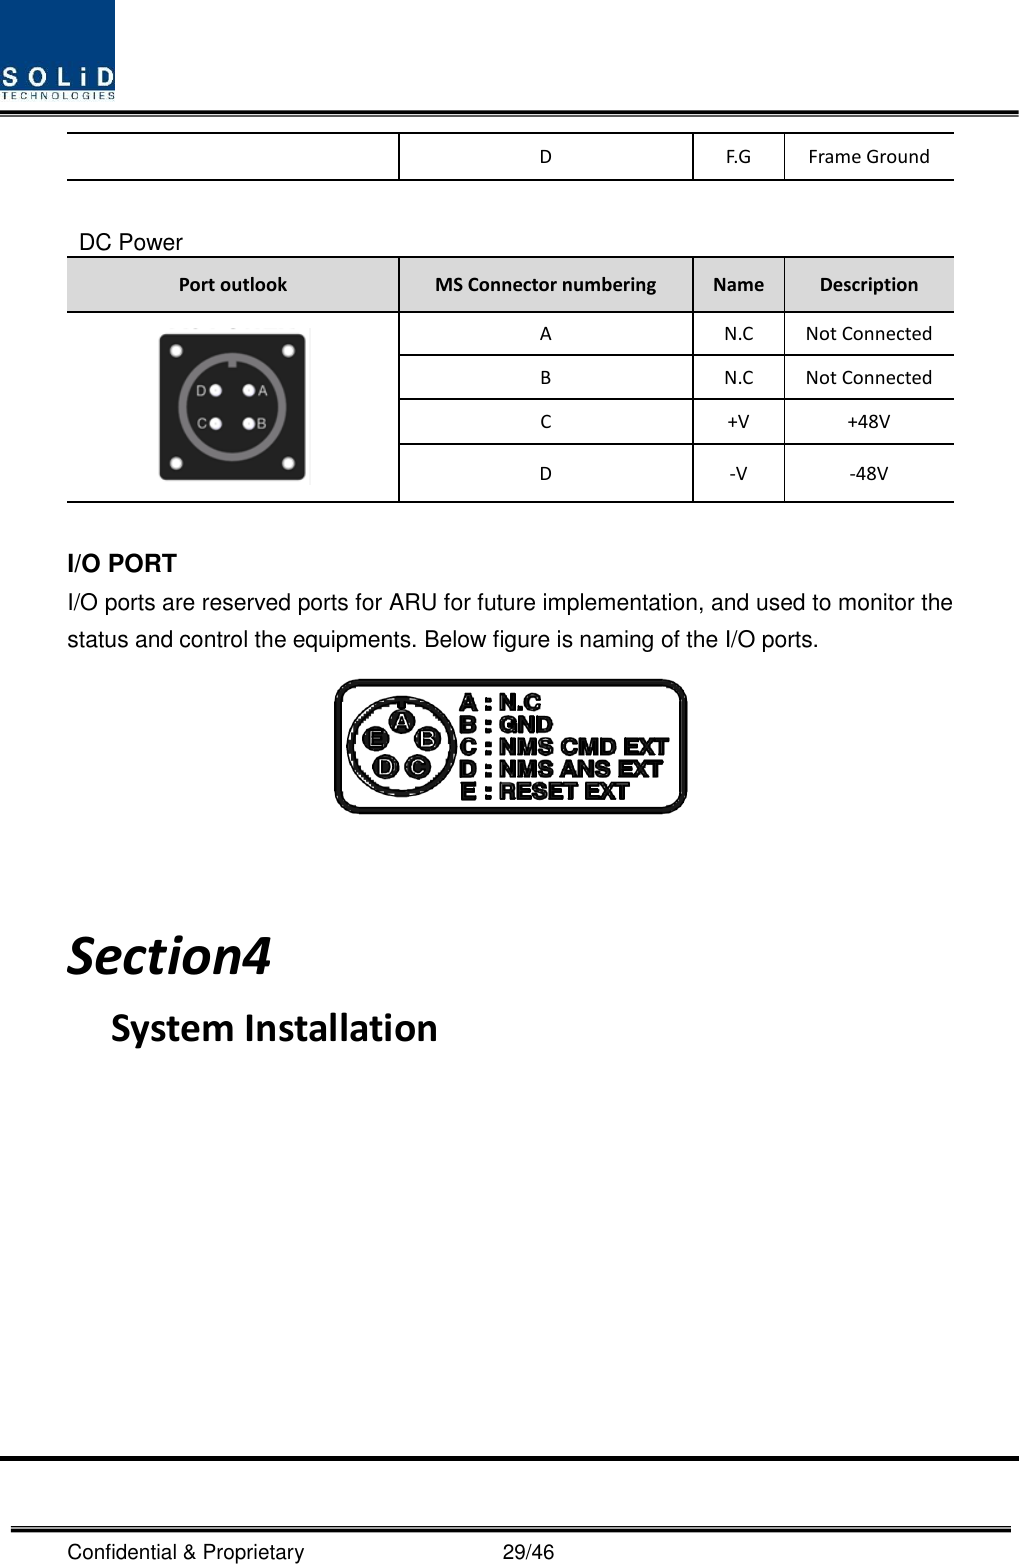  Confidential &amp; Proprietary                                      29/46 D F.G Frame Ground  DC Power Port outlook MS Connector numbering Name Description  A N.C Not Connected B N.C Not Connected C +V +48V D -V -48V  I/O PORT I/O ports are reserved ports for ARU for future implementation, and used to monitor the status and control the equipments. Below figure is naming of the I/O ports.    Section4                                           System Installation            